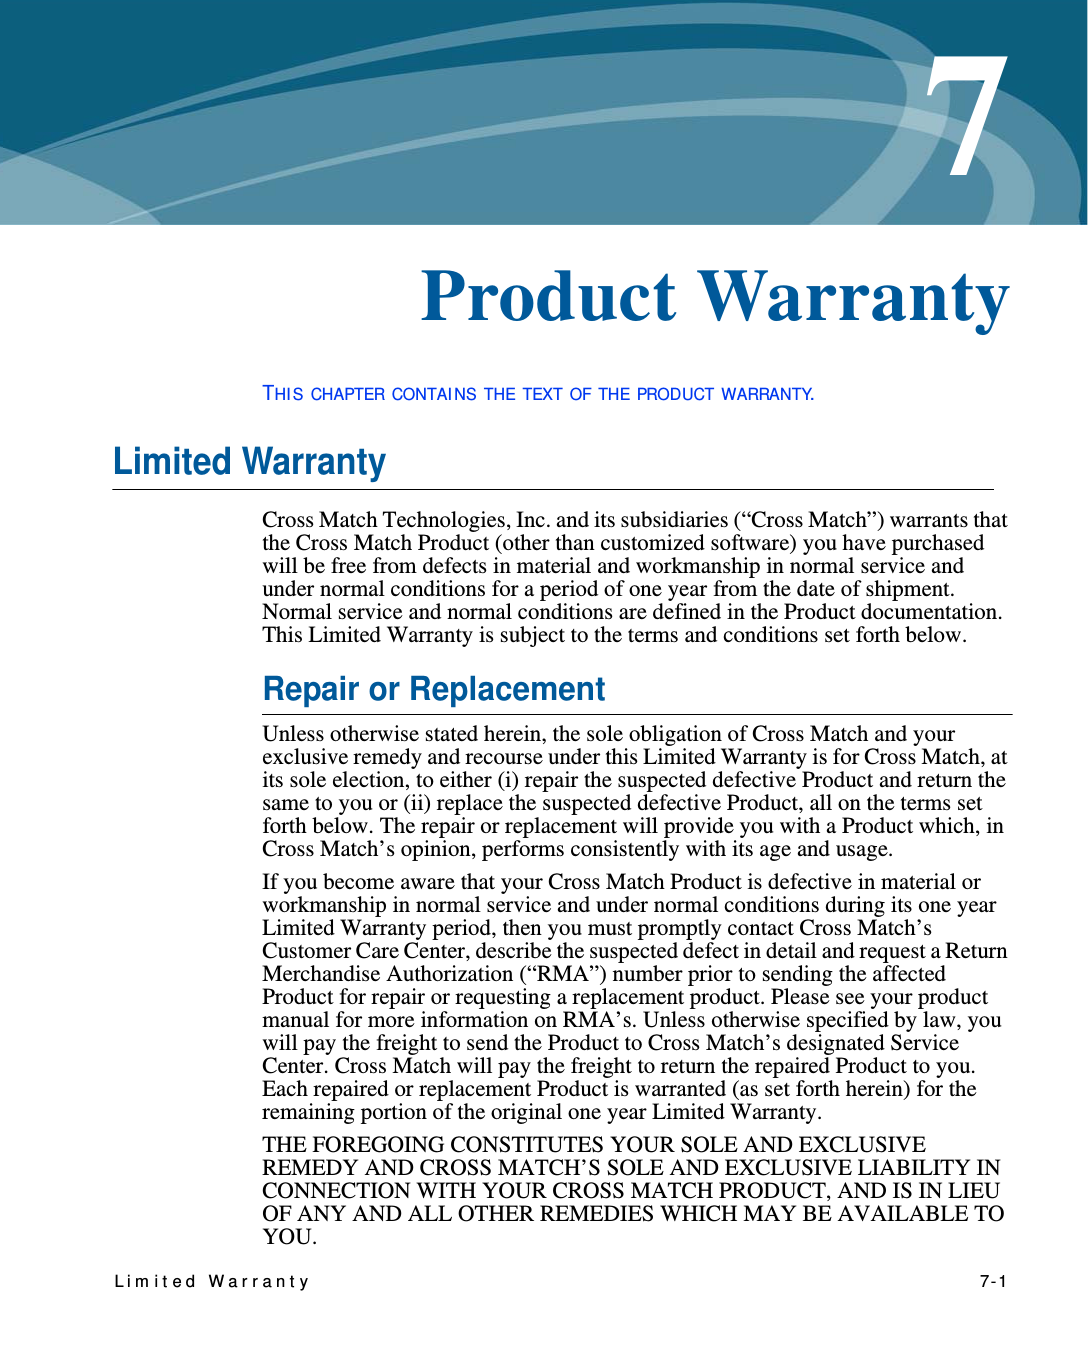 Lim it ed Warrant y   7-17Chapter 0Product WarrantyTHI S CHAPTER CONTAI NS THE TEXT OF THE PRODUCT WARRANTY.Limited WarrantyCross Match Technologies, Inc. and its subsidiaries (“Cross Match”) warrants that the Cross Match Product (other than customized software) you have purchased will be free from defects in material and workmanship in normal service and under normal conditions for a period of one year from the date of shipment. Normal service and normal conditions are defined in the Product documentation. This Limited Warranty is subject to the terms and conditions set forth below.Repair or ReplacementUnless otherwise stated herein, the sole obligation of Cross Match and your exclusive remedy and recourse under this Limited Warranty is for Cross Match, at its sole election, to either (i) repair the suspected defective Product and return the same to you or (ii) replace the suspected defective Product, all on the terms set forth below. The repair or replacement will provide you with a Product which, in Cross Match’s opinion, performs consistently with its age and usage.If you become aware that your Cross Match Product is defective in material or workmanship in normal service and under normal conditions during its one year Limited Warranty period, then you must promptly contact Cross Match’s Customer Care Center, describe the suspected defect in detail and request a Return Merchandise Authorization (“RMA”) number prior to sending the affected Product for repair or requesting a replacement product. Please see your product manual for more information on RMA’s. Unless otherwise specified by law, you will pay the freight to send the Product to Cross Match’s designated Service Center. Cross Match will pay the freight to return the repaired Product to you. Each repaired or replacement Product is warranted (as set forth herein) for the remaining portion of the original one year Limited Warranty.THE FOREGOING CONSTITUTES YOUR SOLE AND EXCLUSIVE REMEDY AND CROSS MATCH’S SOLE AND EXCLUSIVE LIABILITY IN CONNECTION WITH YOUR CROSS MATCH PRODUCT, AND IS IN LIEU OF ANY AND ALL OTHER REMEDIES WHICH MAY BE AVAILABLE TO YOU.